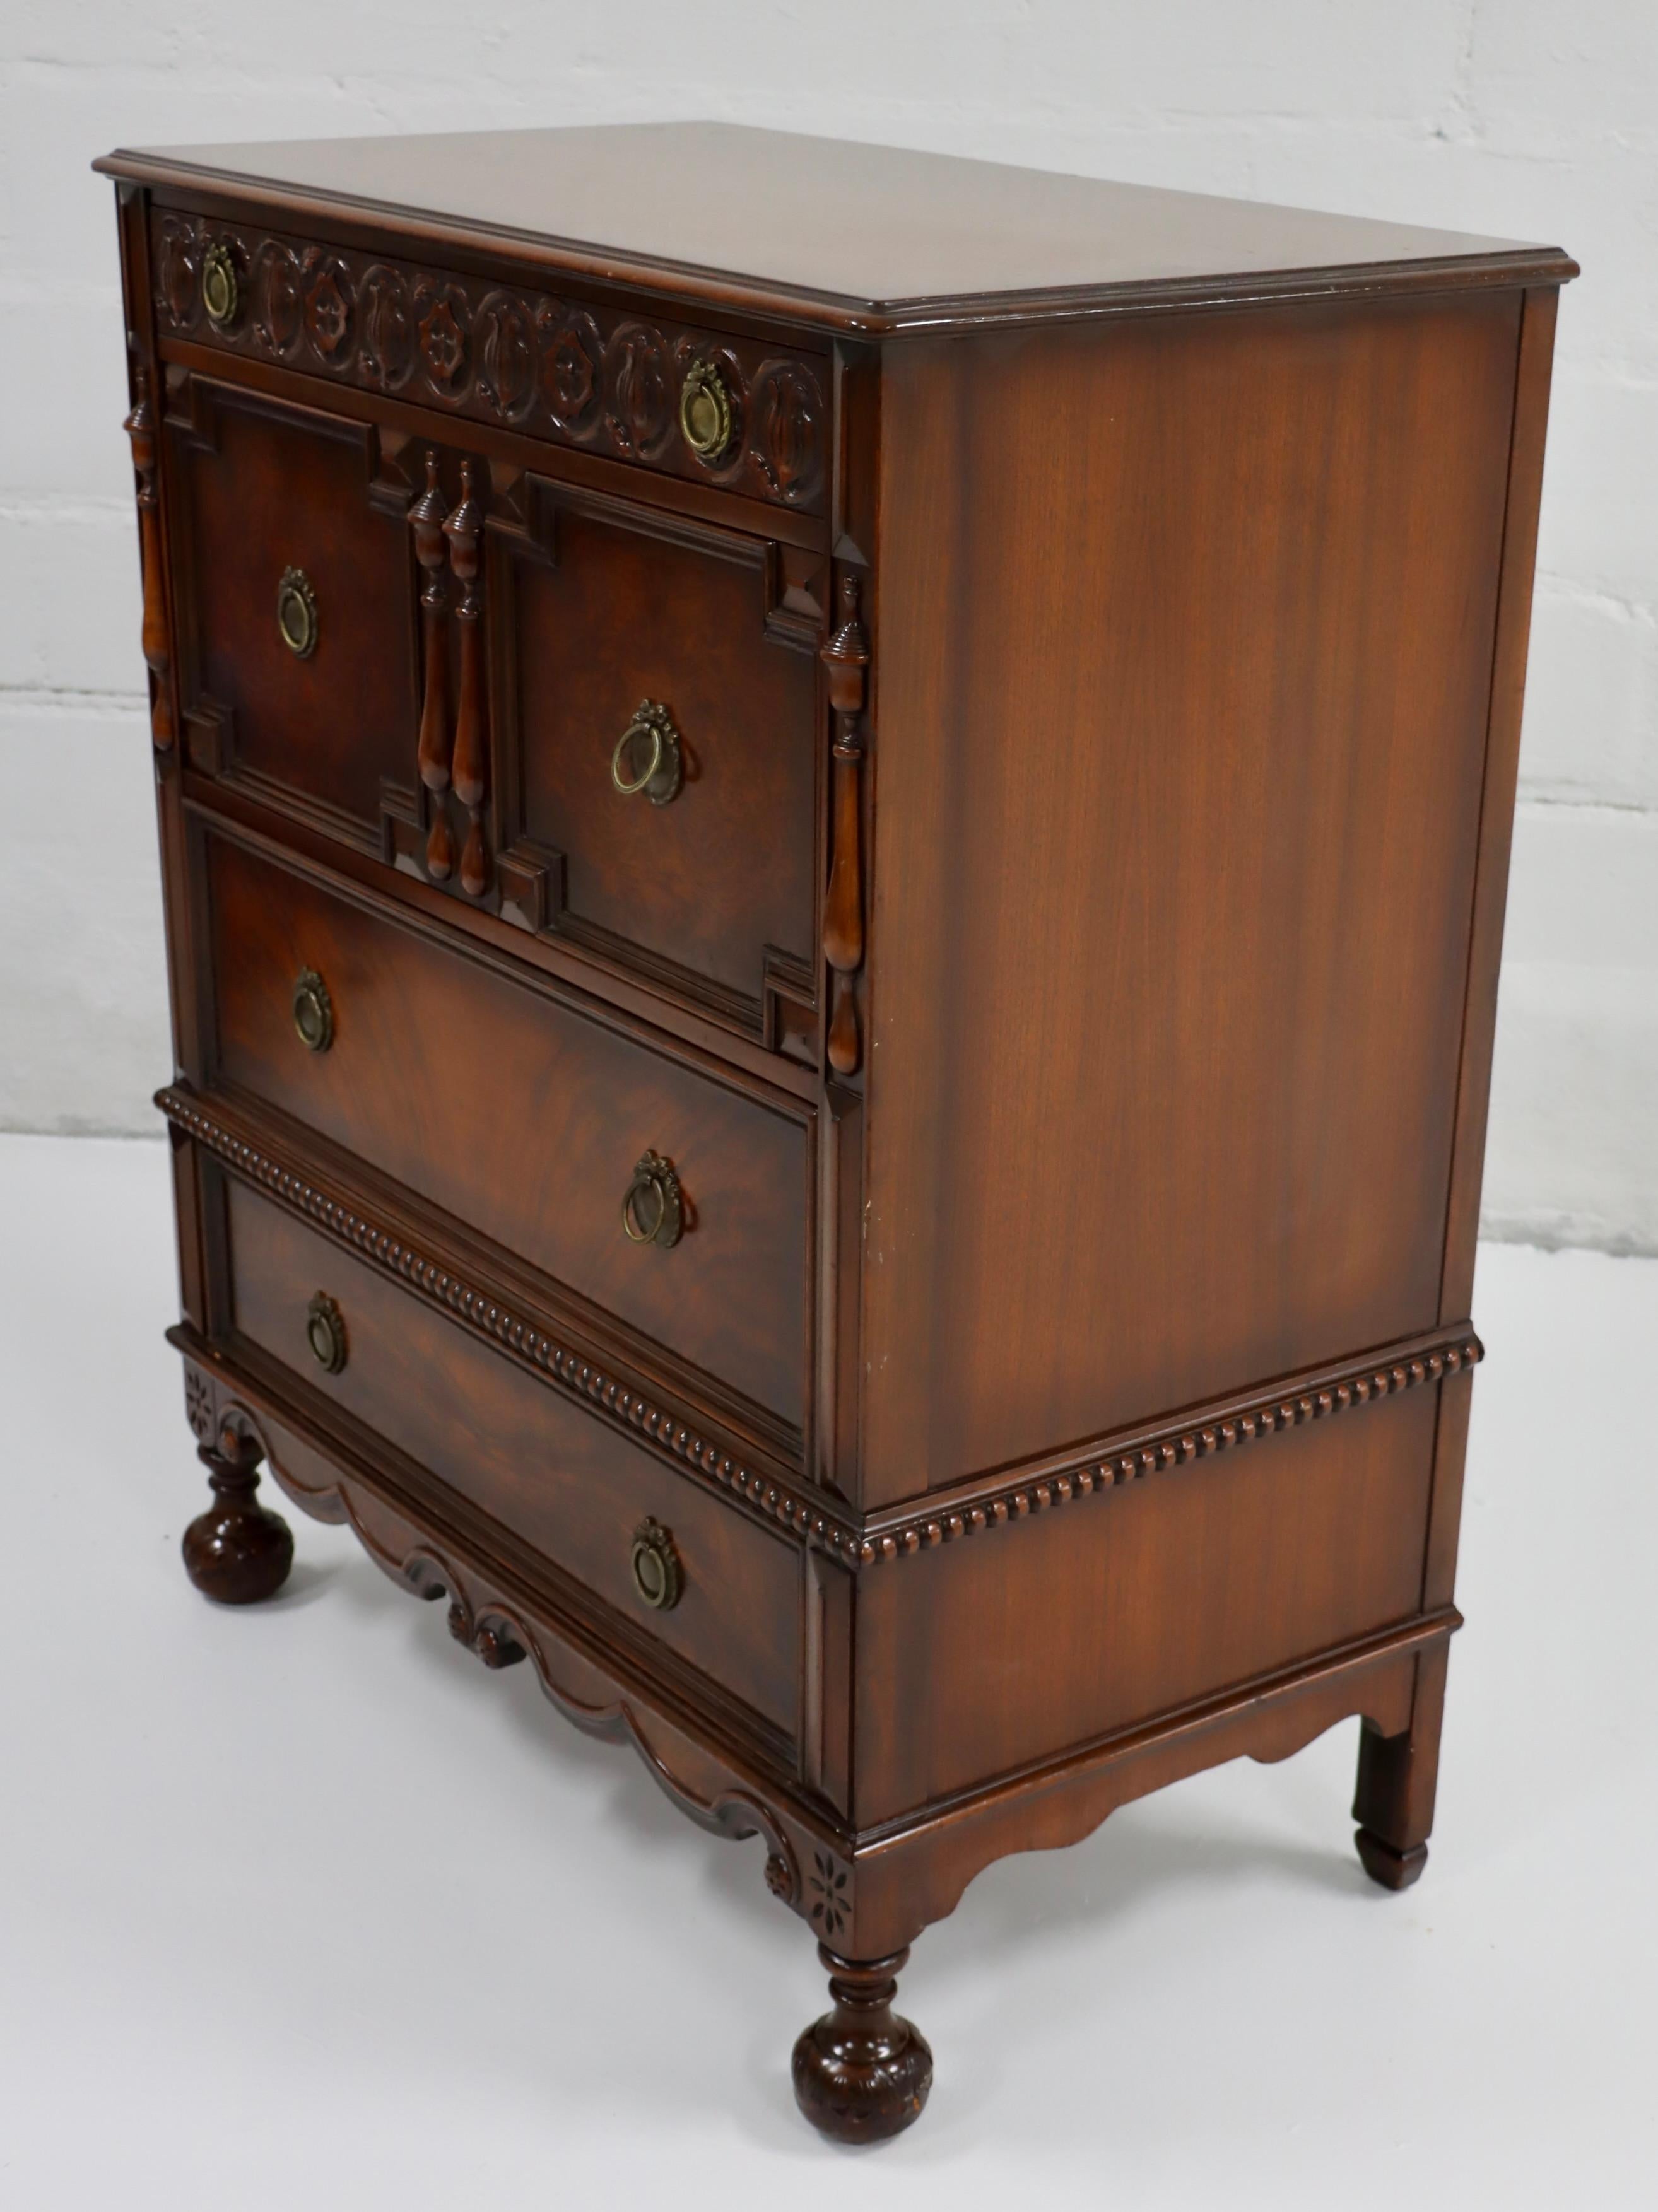 Mid-20th Century 1940's Tall Dresser By Berkey & Gay Furniture With Amazing Carved Wood Detail